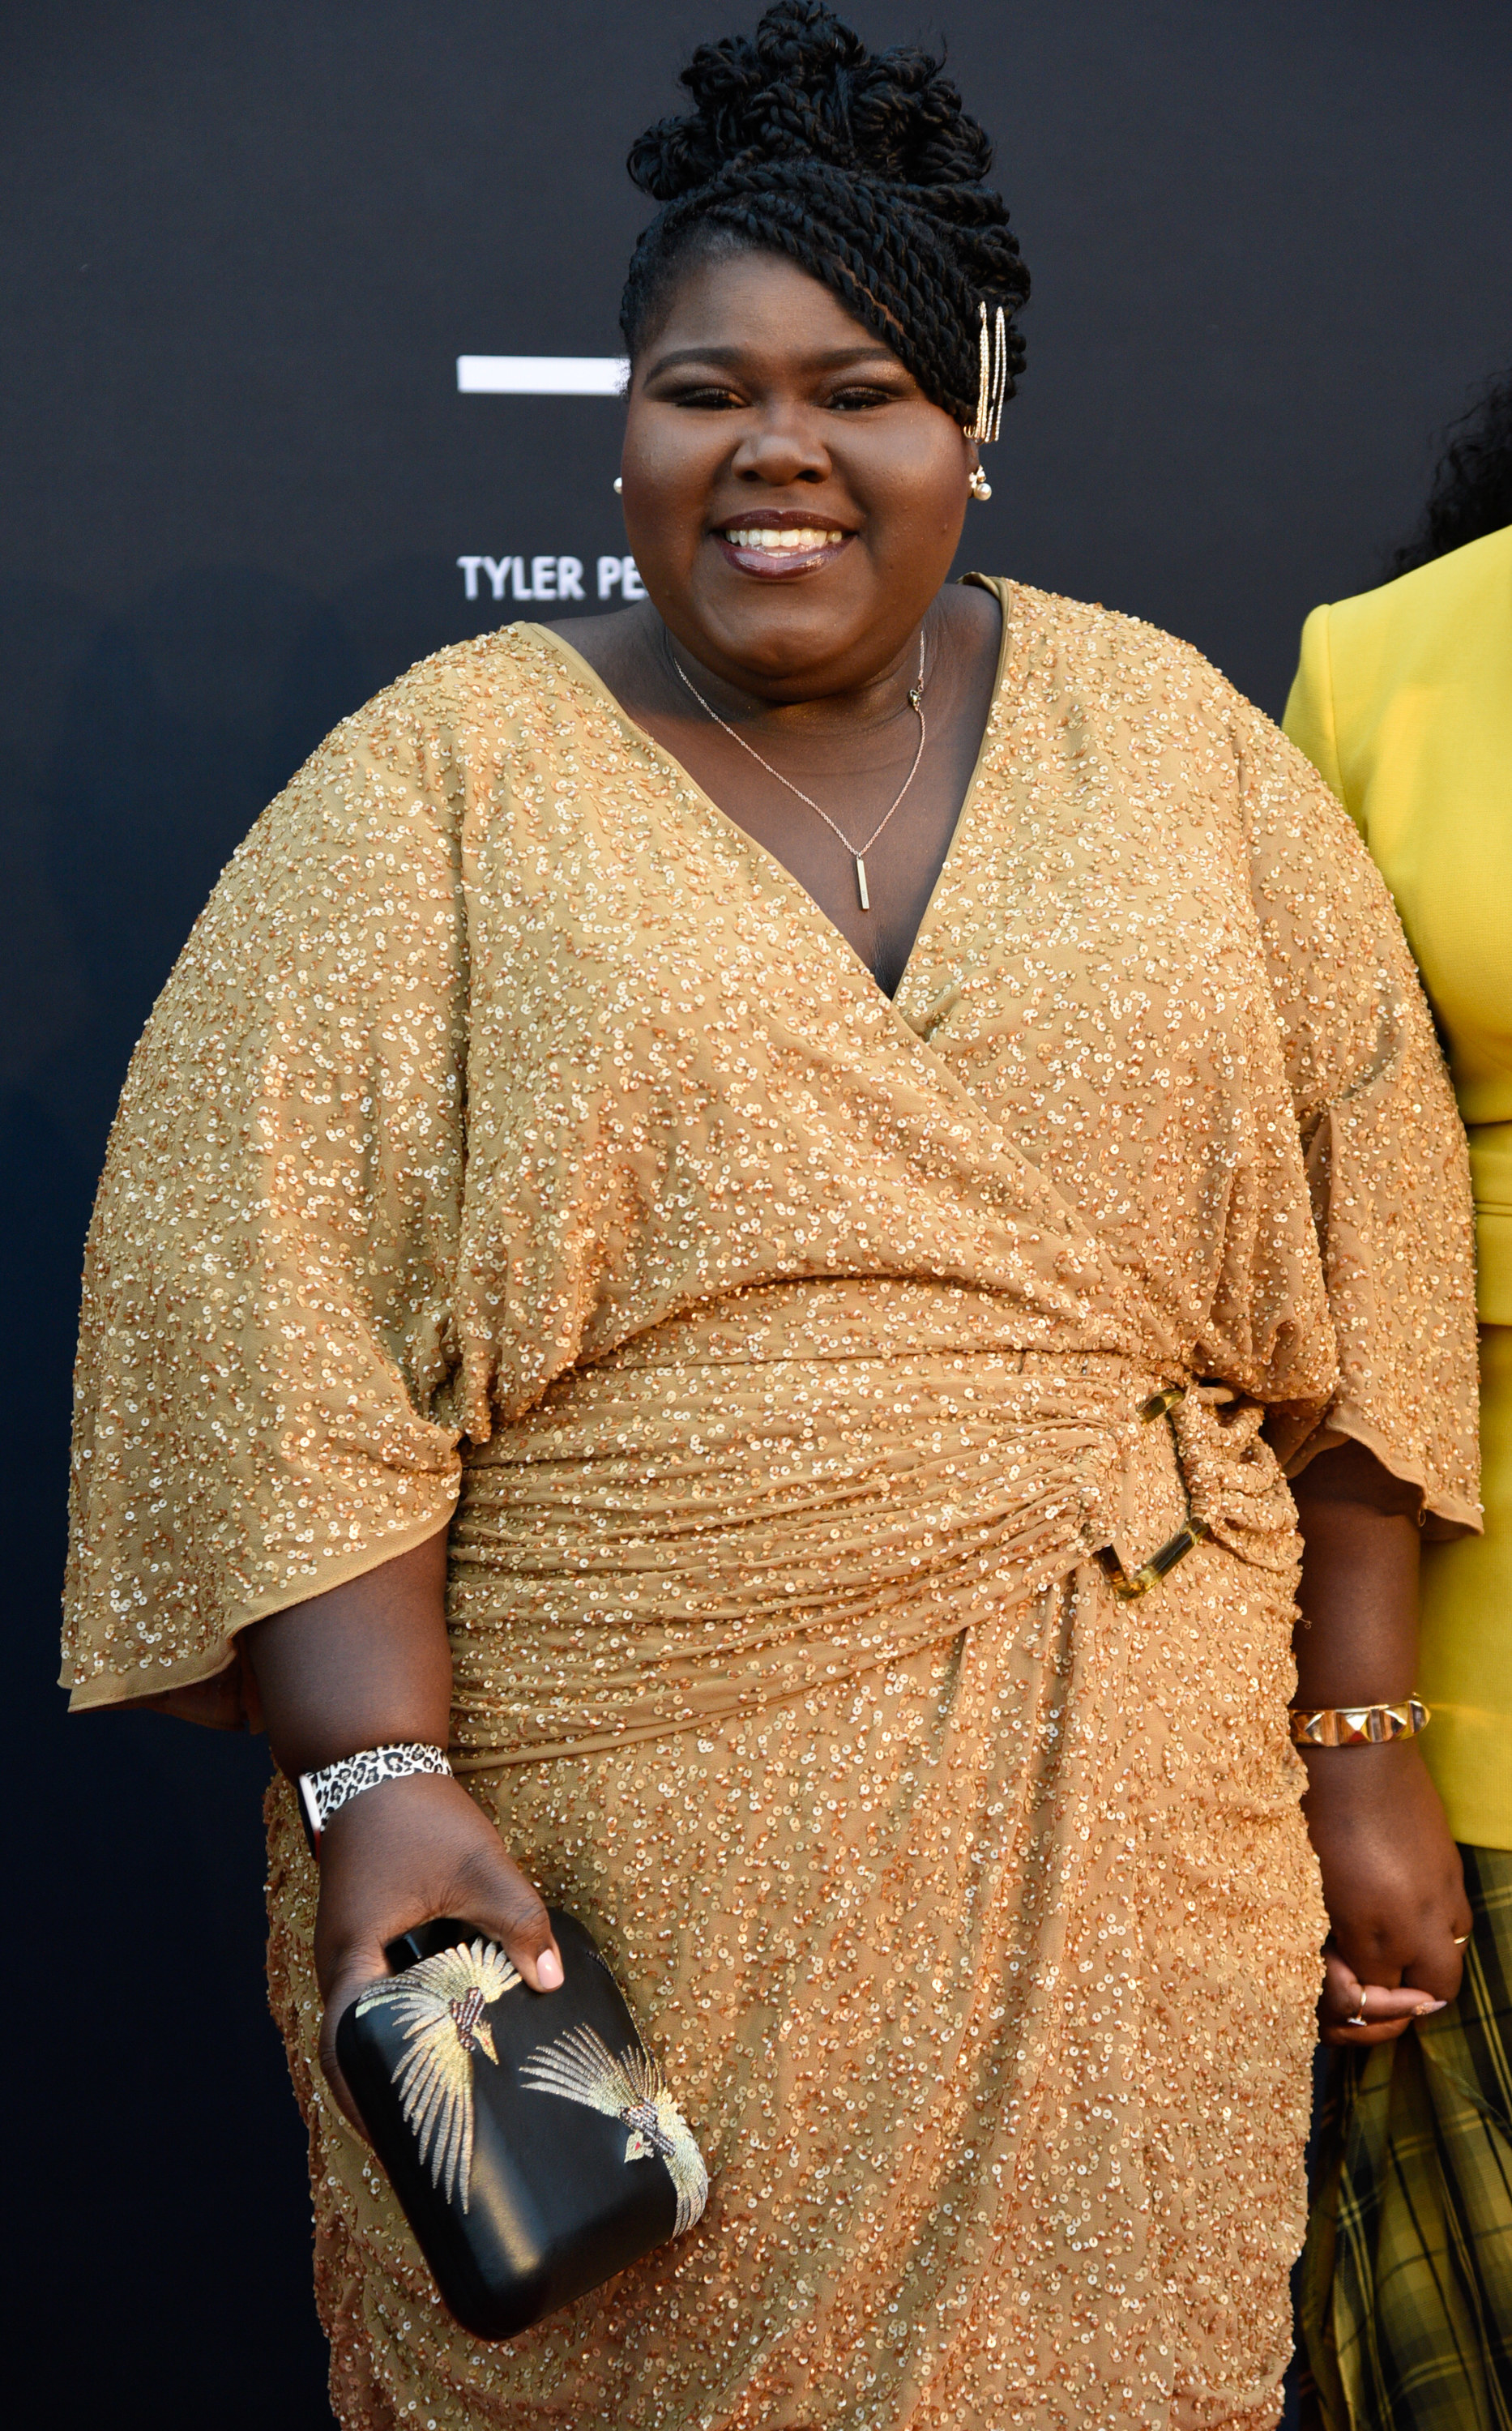 Gabourey Sidibe on the red carpet in a yellow dress.